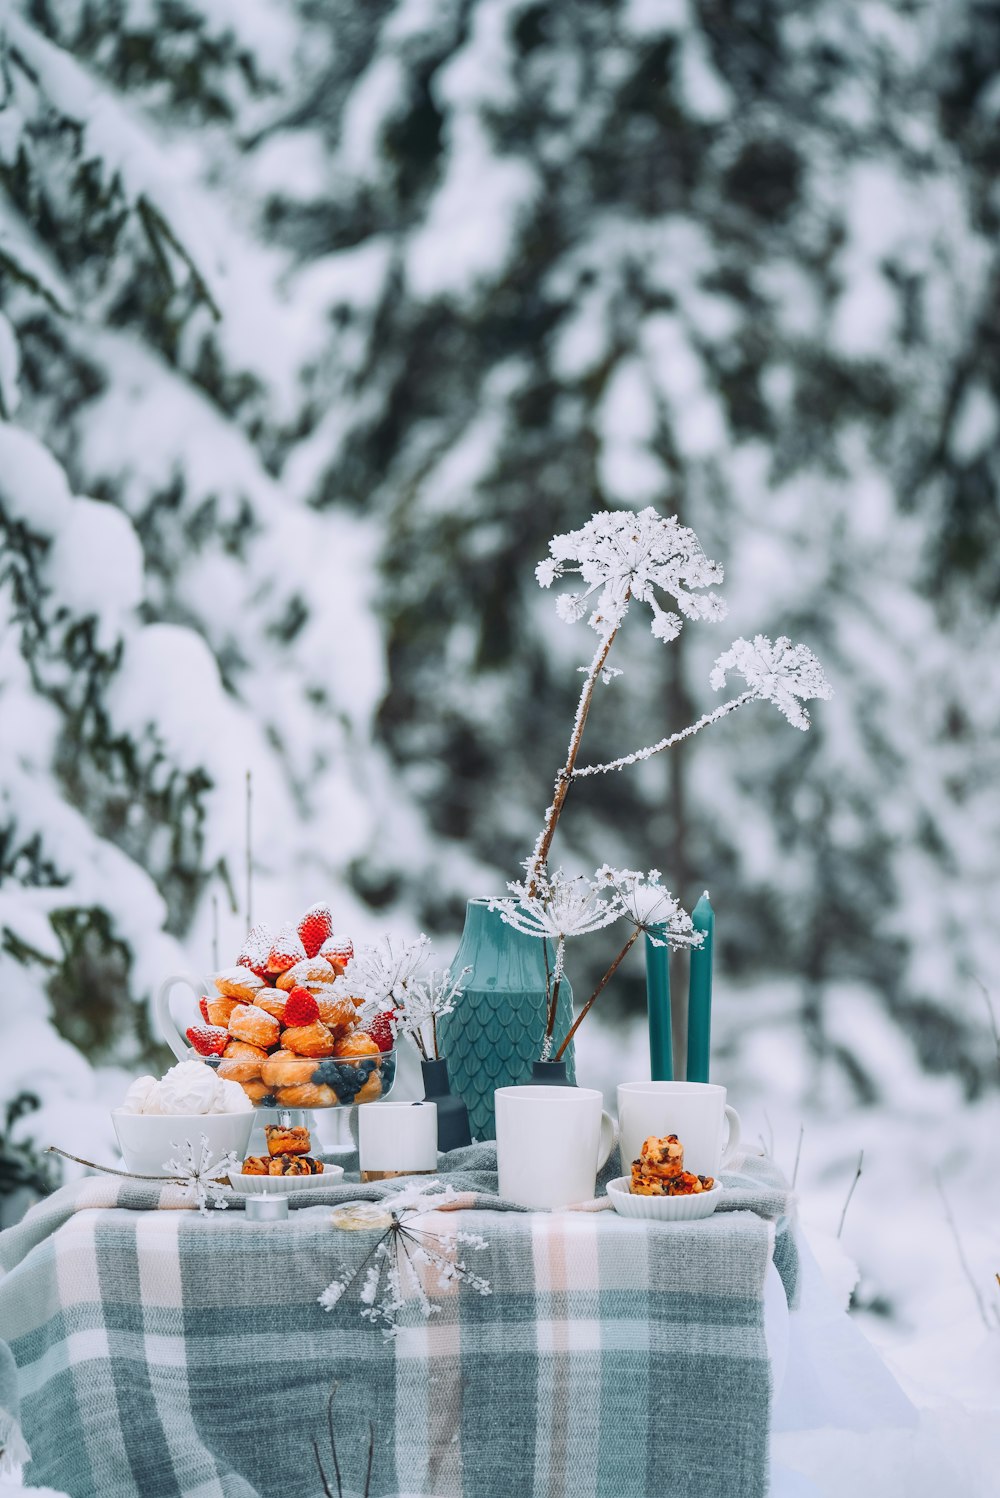 a table with food and drinks on it with snow on the side